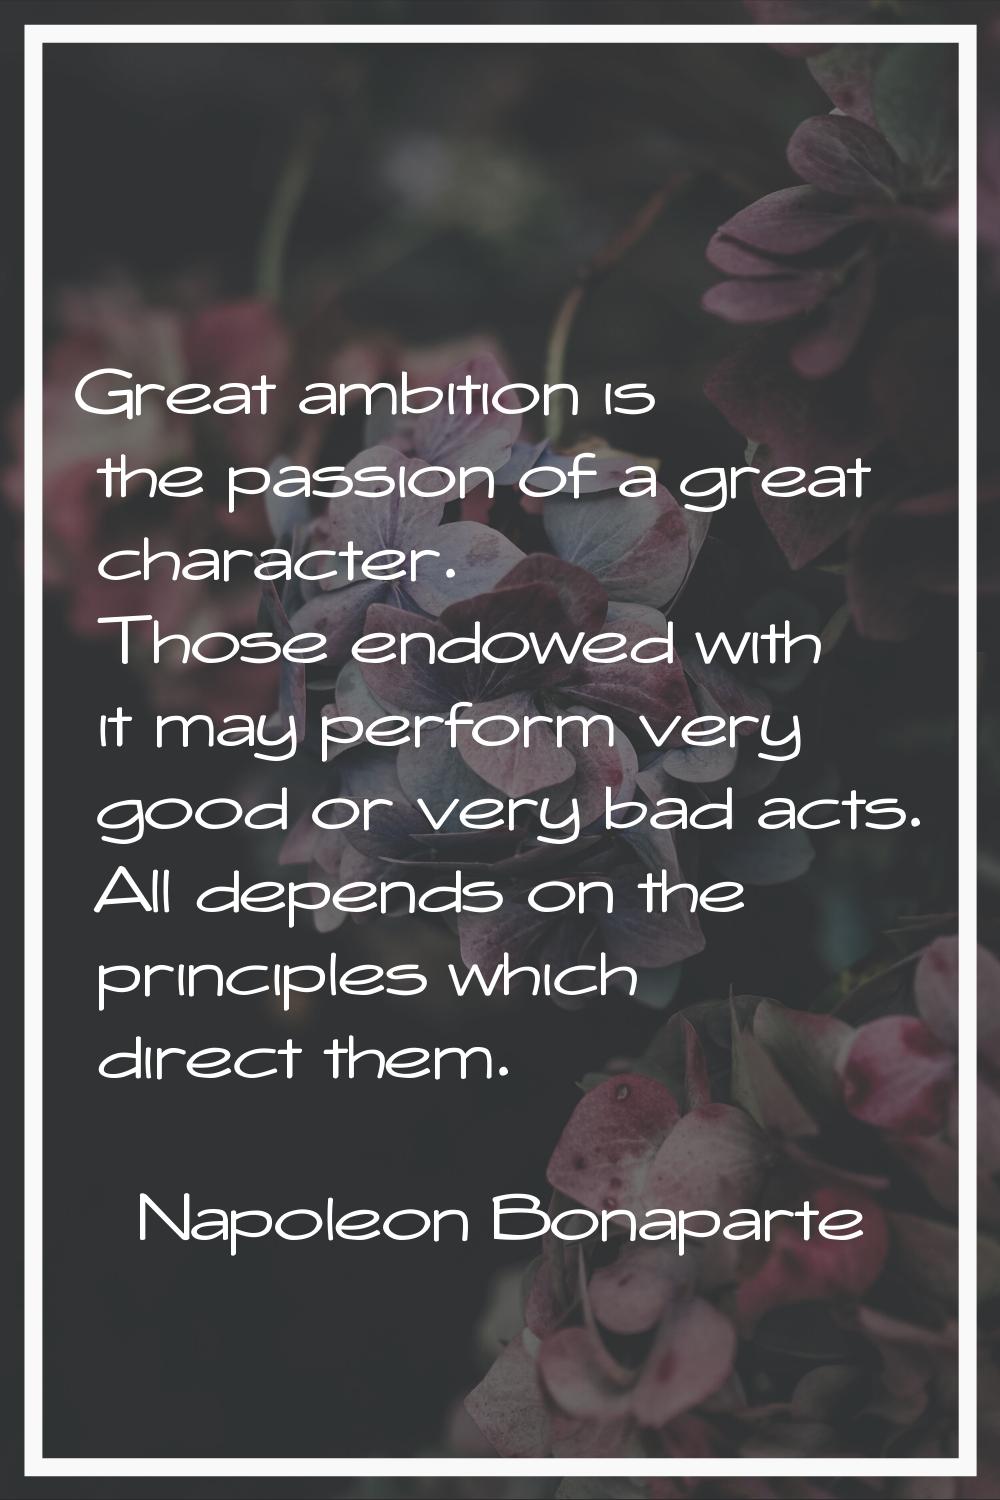 Great ambition is the passion of a great character. Those endowed with it may perform very good or 